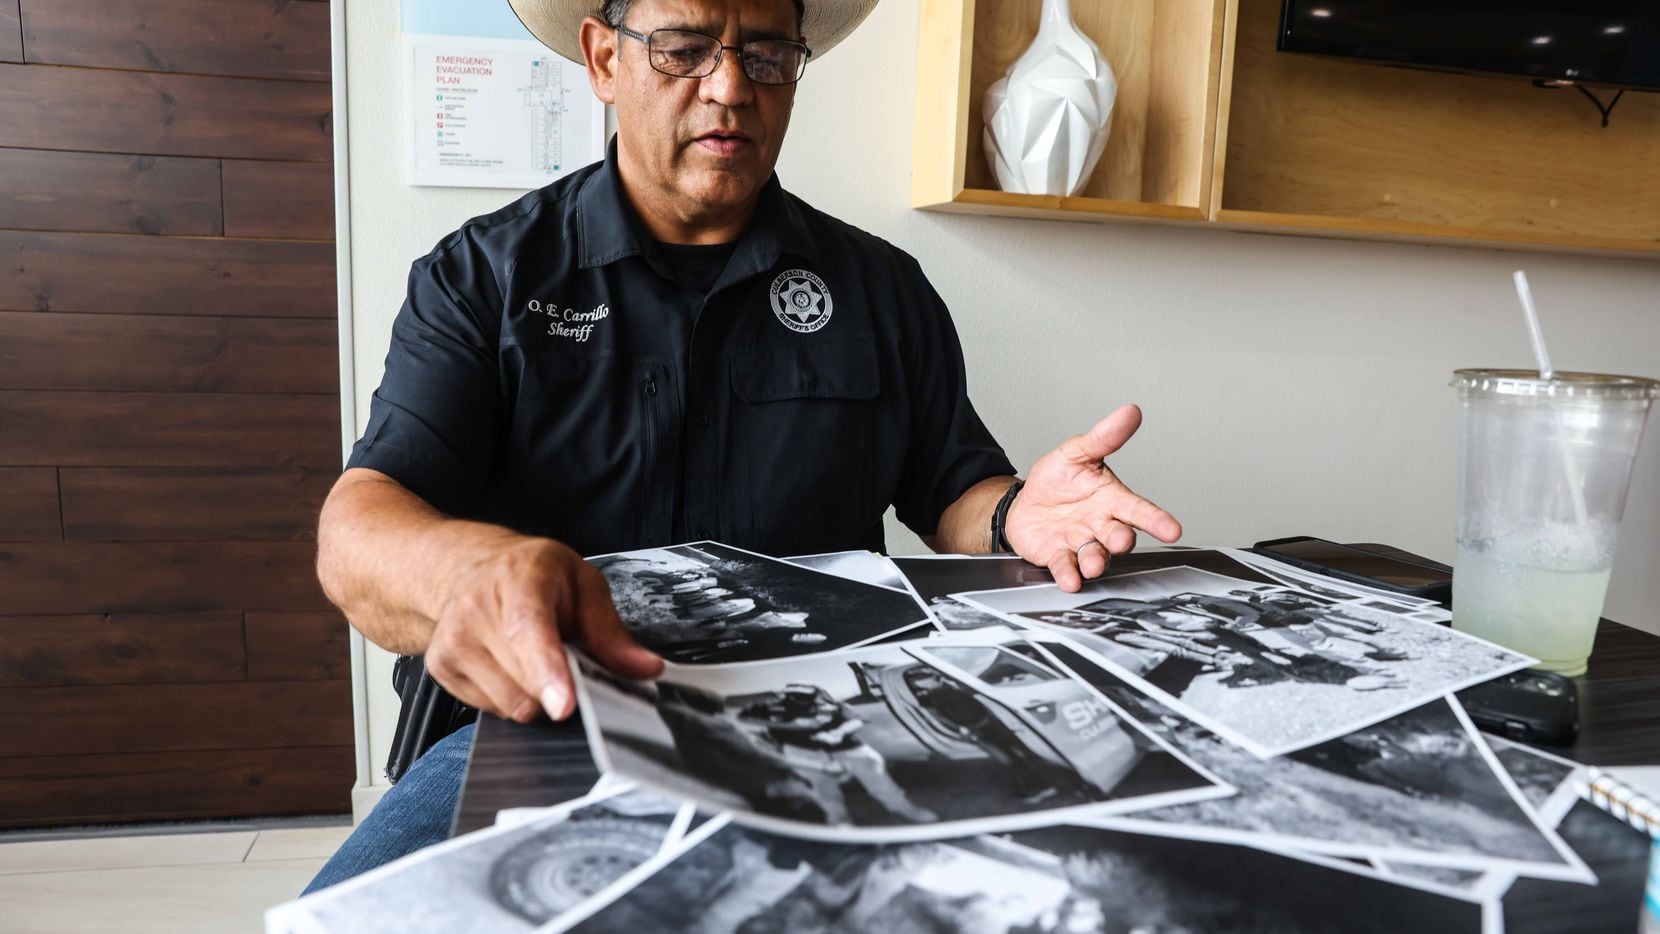 Culberson County Sheriff Oscar Carrillo shows photos of the work his office in Van Horn does...